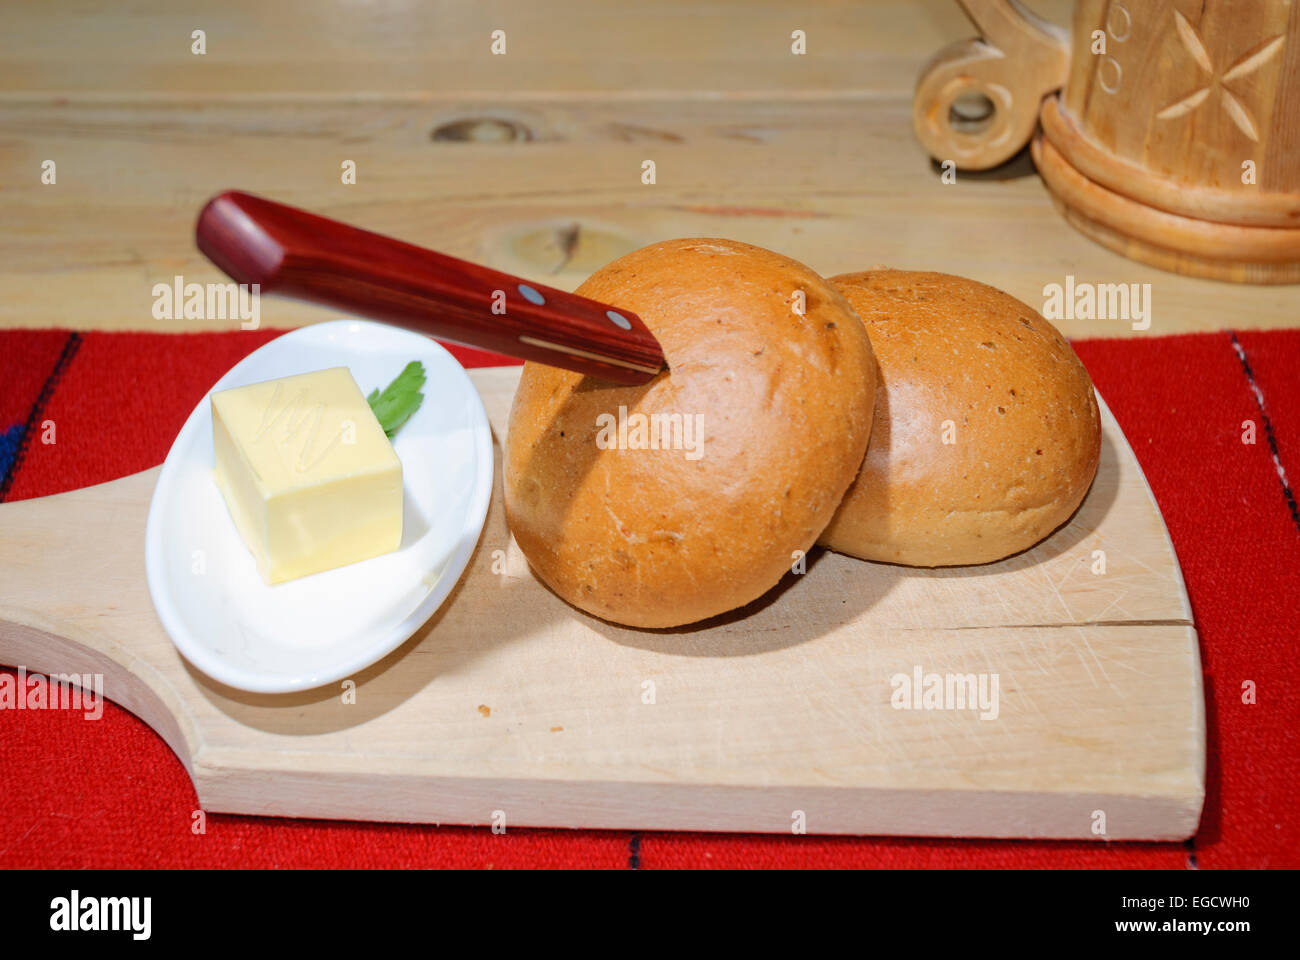 Traditional Baltic food - bread rolls and a knob of butter on a wooden chopping board, with a flagon of beer in the background, Stock Photo